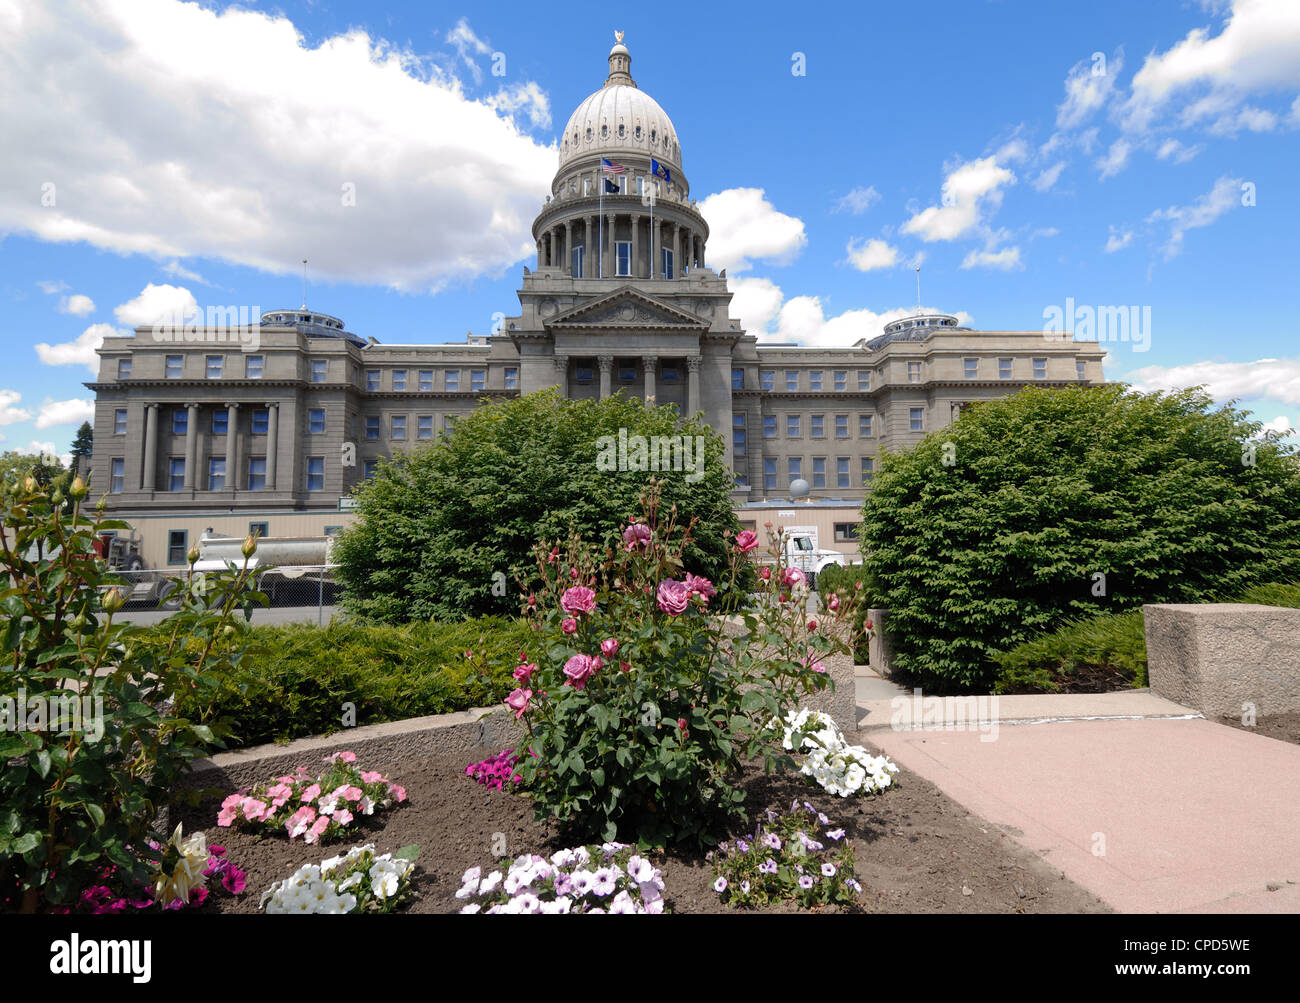 The State Capitol of Montana in Helena.The building is constructed of Montana sandstone and granite. Stock Photo